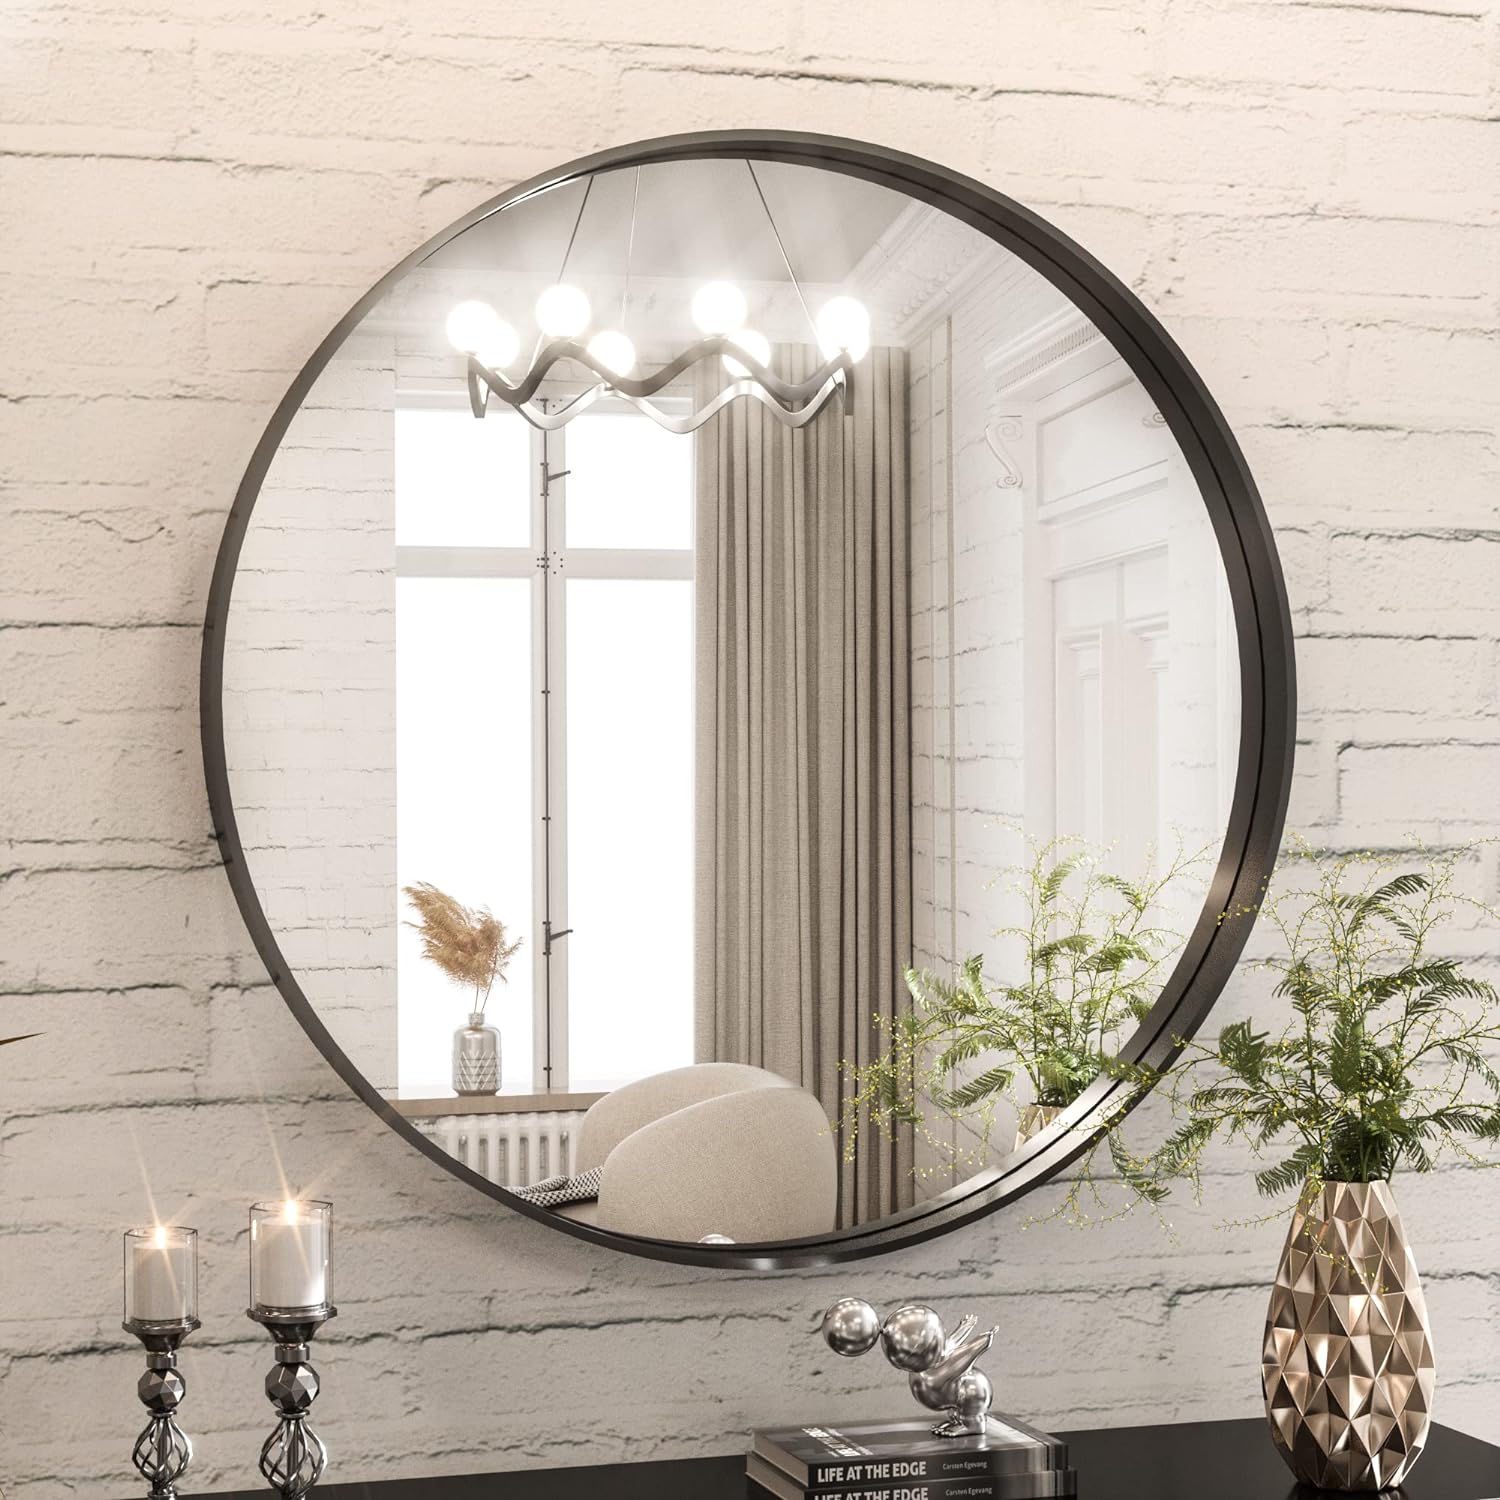 I liked this mirror over my daughter' vanity desk so much that we bought a huge one in the same finish but in a different shape for a powder bath. Both mirrors are clear and distortion-free. Both arrived intact and the frame is a soft, brushed gold but not too yellow - it' a classy finish and they both look a lot more expensive than they were. They made this very easy to hang.